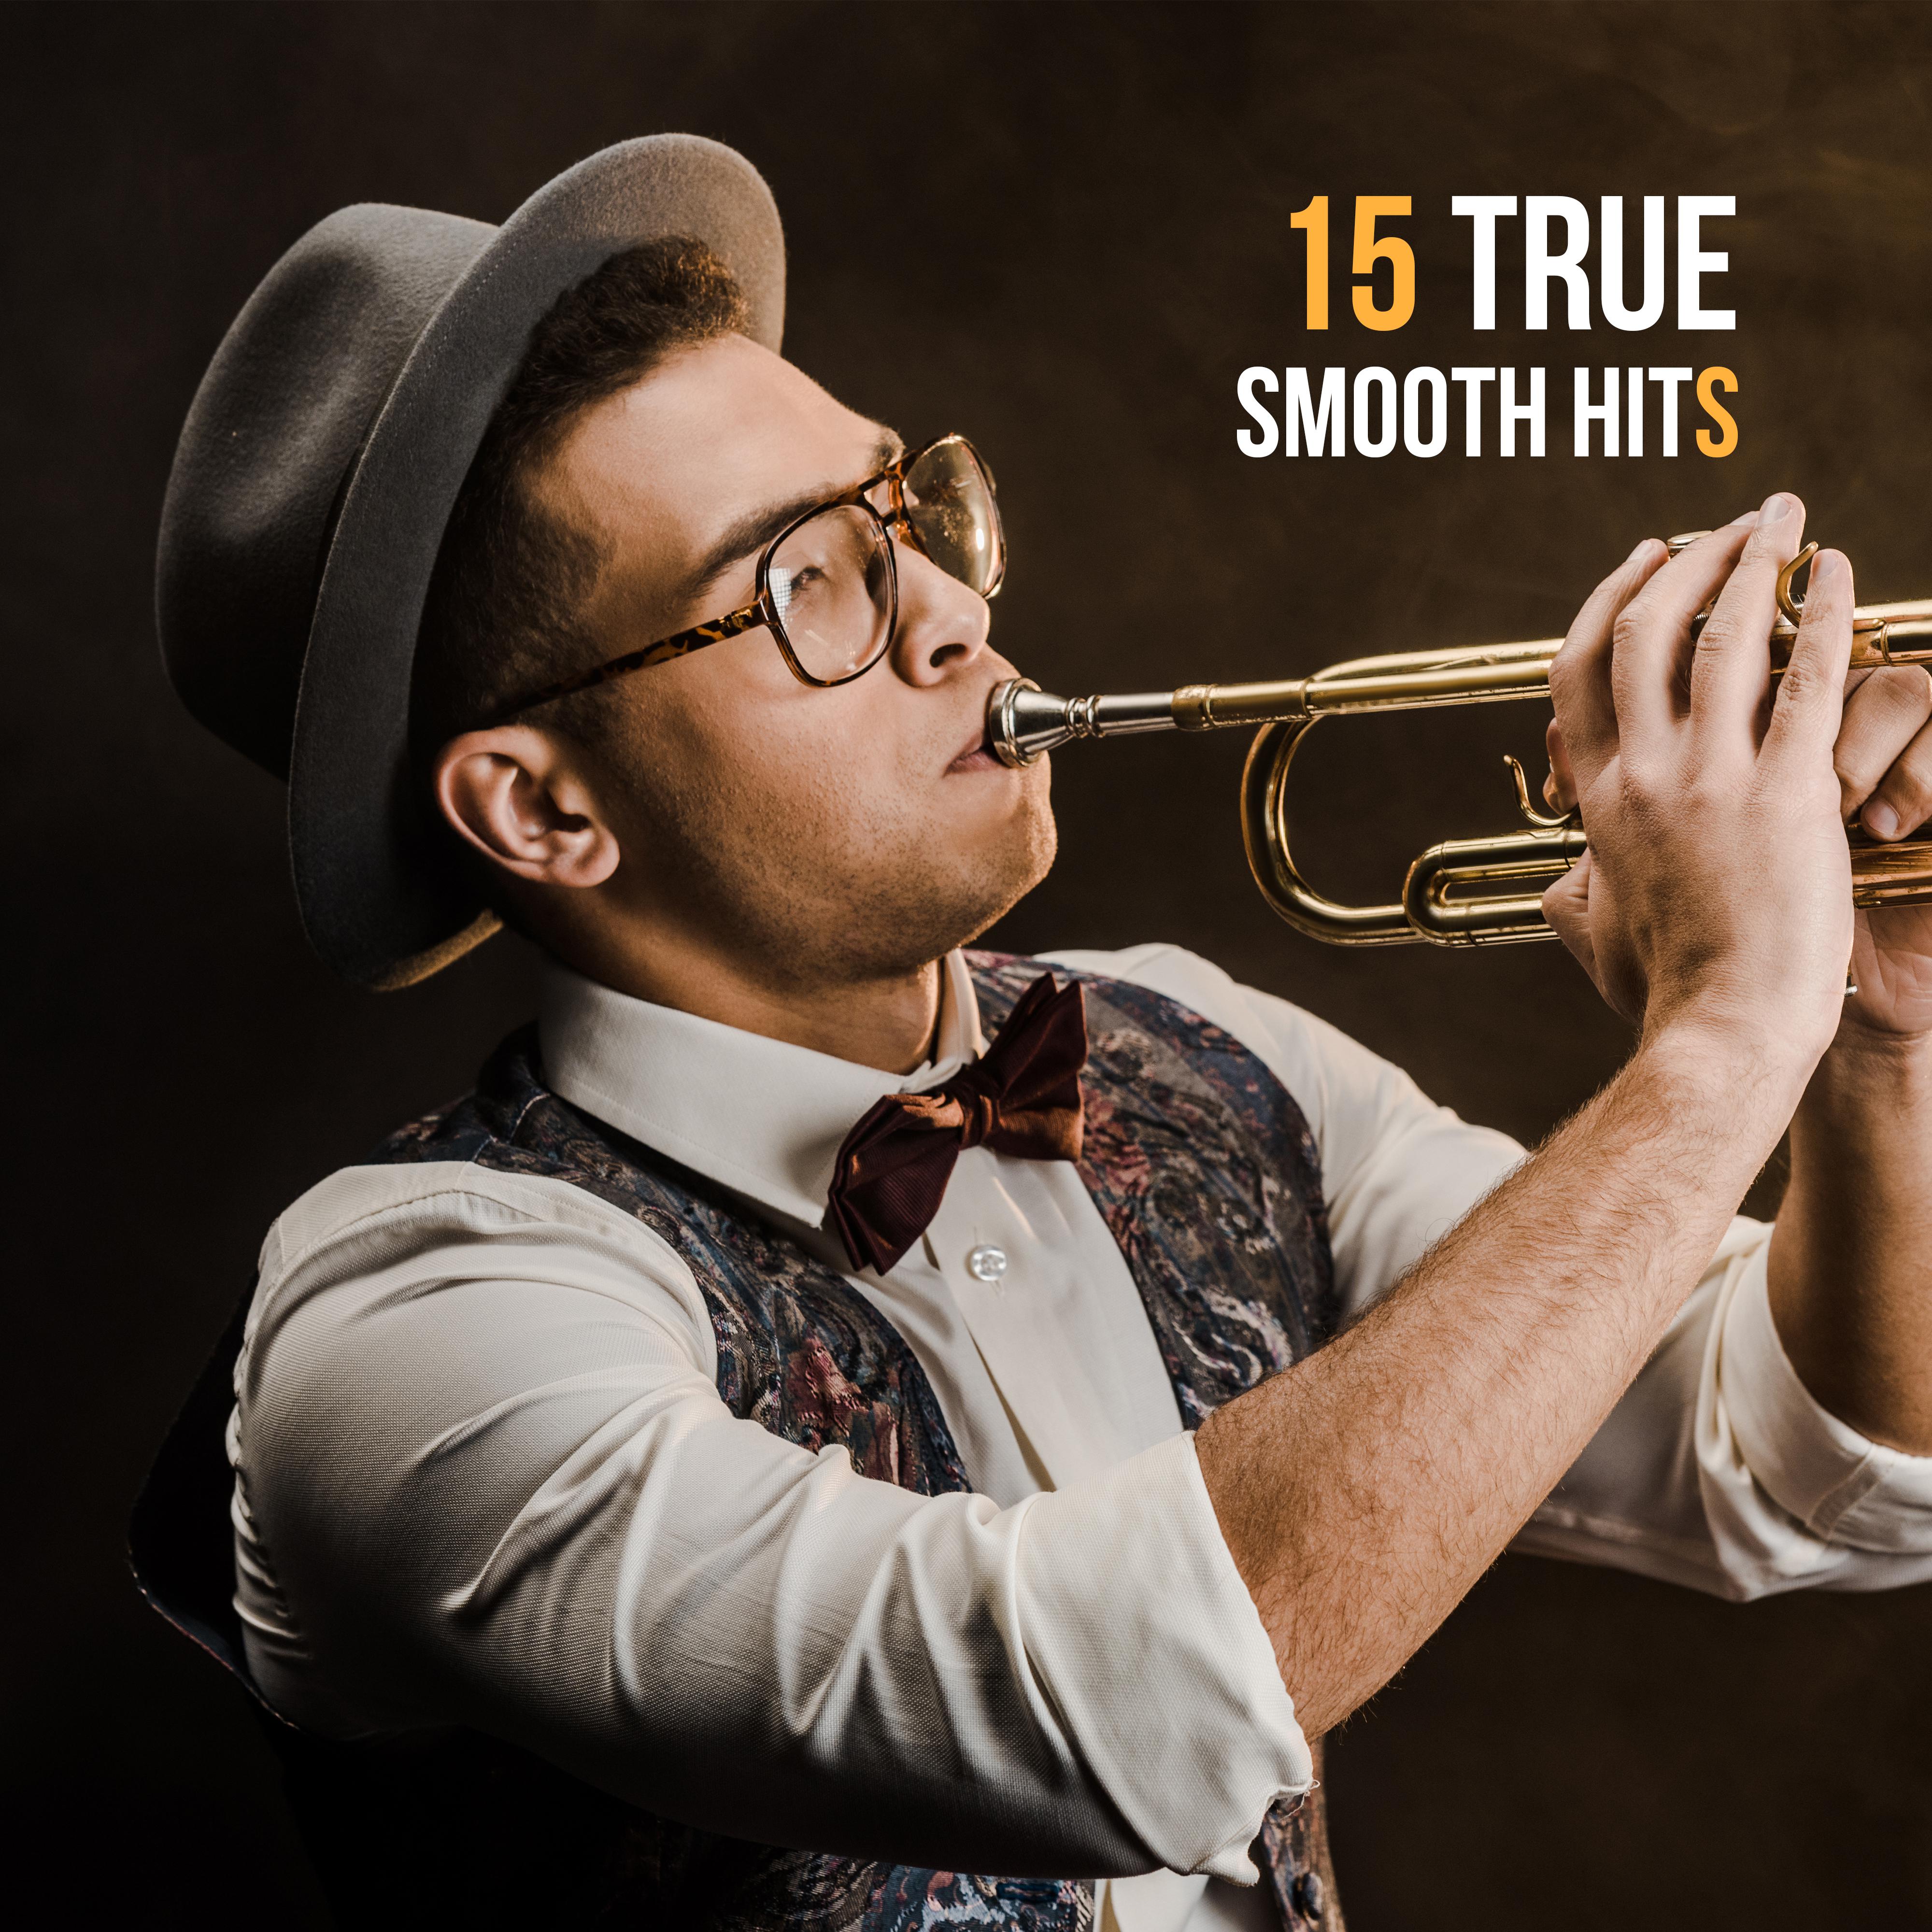 15 True Smooth Hits – Instrumental Jazz Music Ambient, Beautiful Jazz, Romantic Melodies, Jazz Relaxation, Smooth Jazz After Work